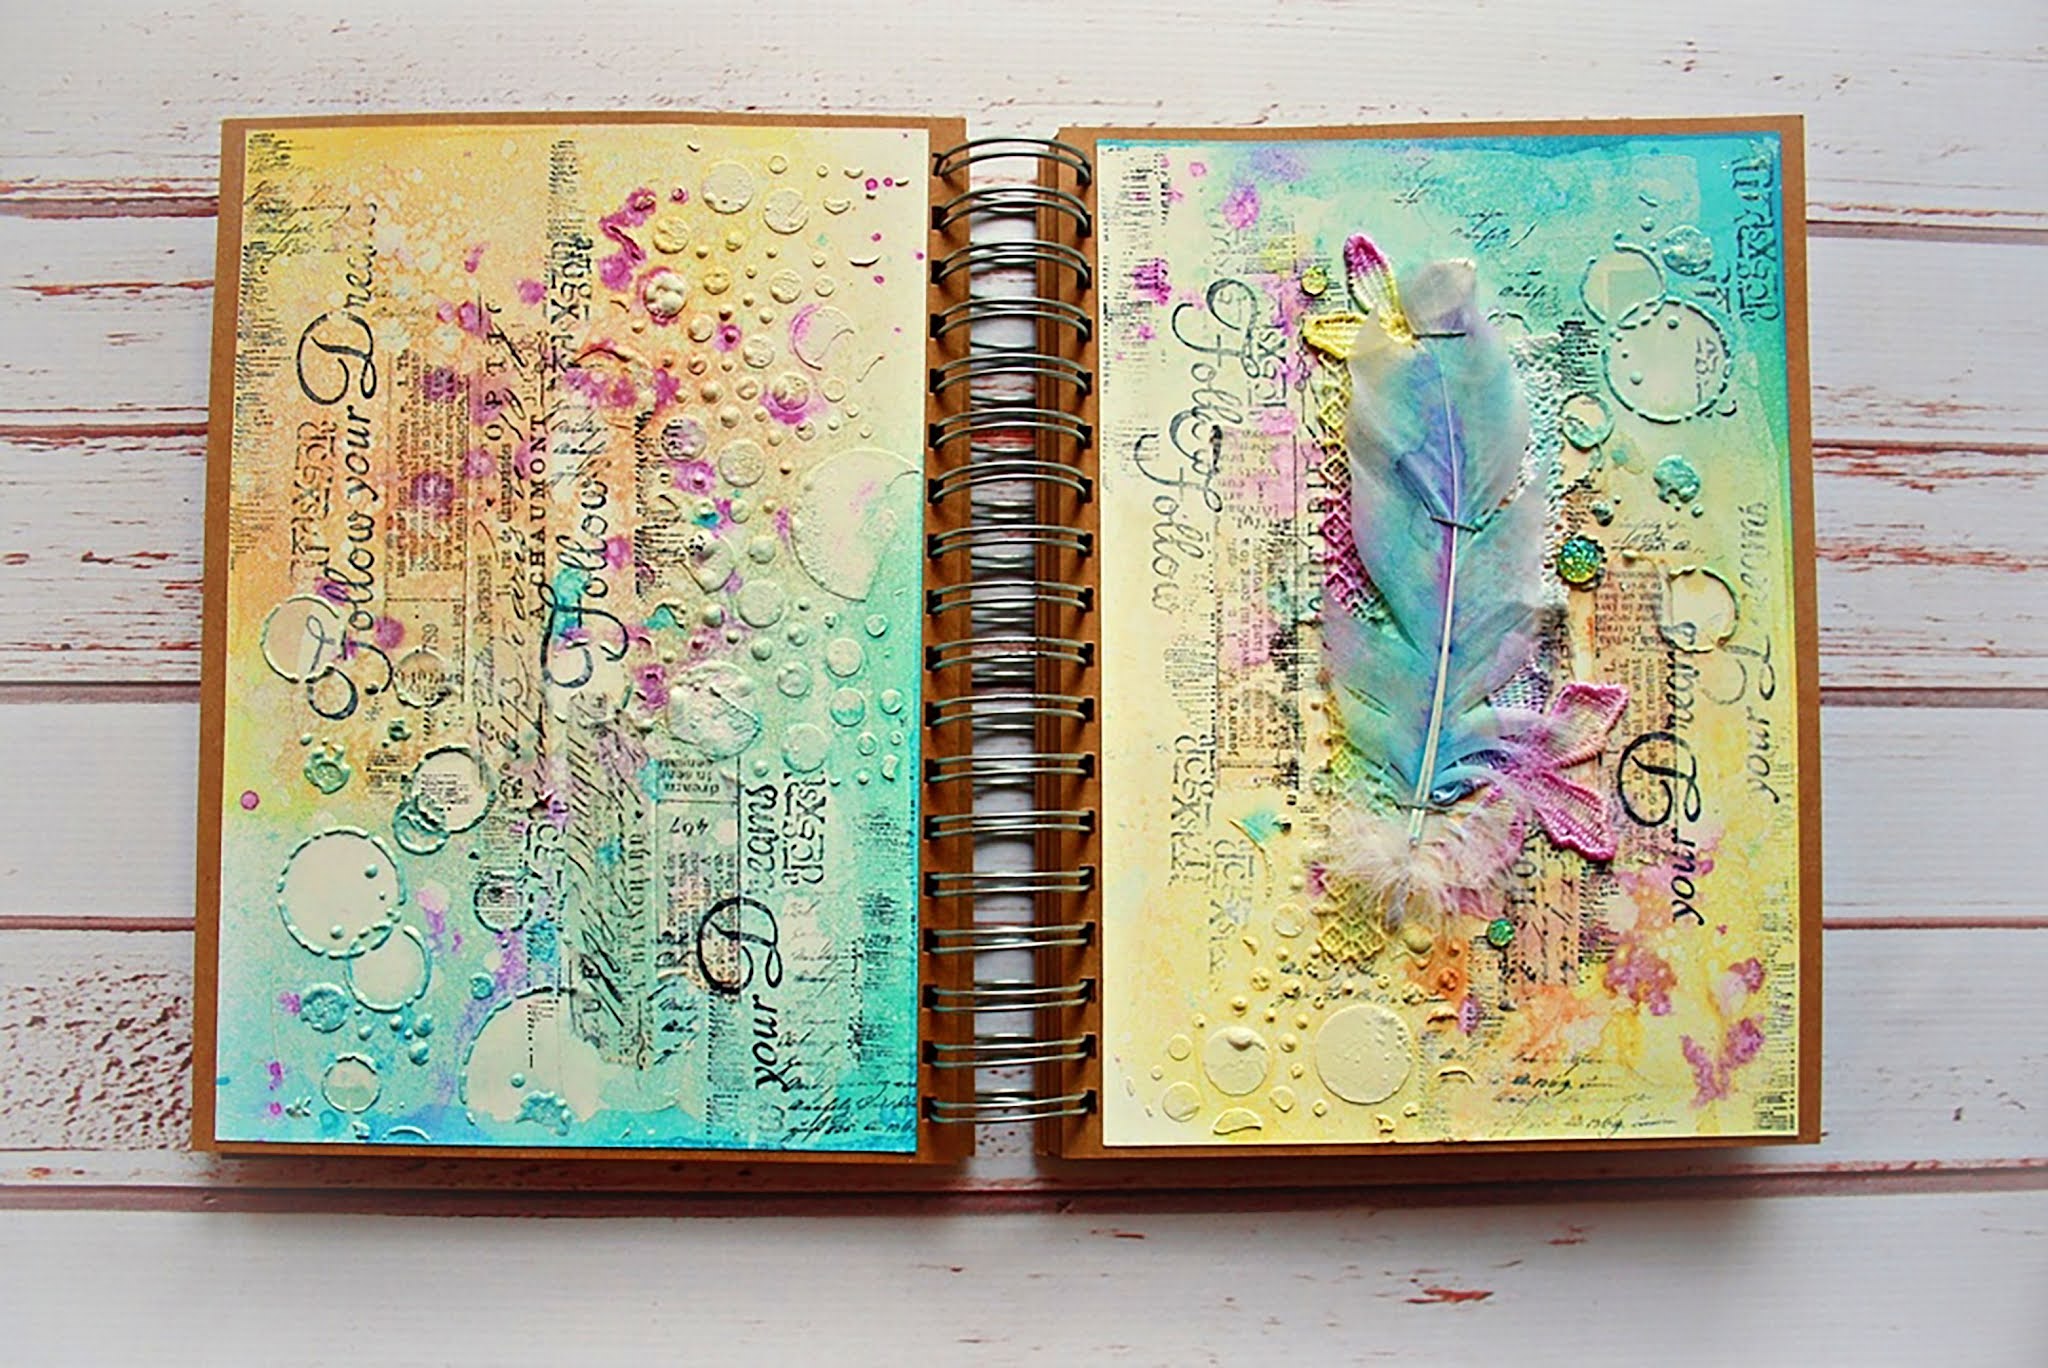 How to create an introduction page for your art journal